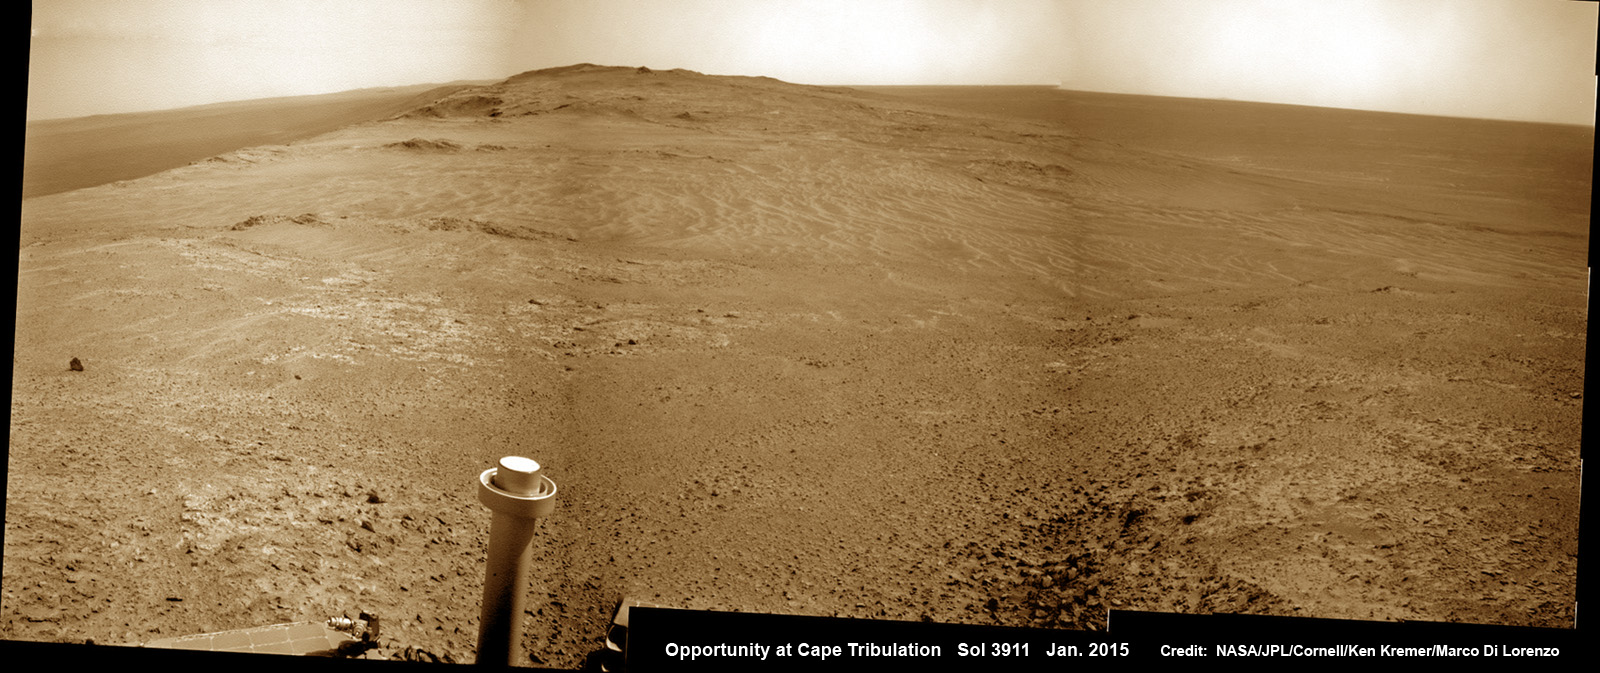 11 Years on Mars! New mountain top view from NASA’s Opportunity rover taken on the day of her 11th anniversary exploring the Red Planet on Sol 3911, Jan. 24, 2015 since Martian touchdown on Jan. 24, 2004. The view from atop Cape Tribulation was taken just after departing the summit and shows the down slope road ahead to next science destination at Marathon Valley some 200 meters away.  This navcam camera photo mosaic was assembled from images taken on Sol 3911 and colorized.  Credit: NASA/JPL/Cornell/ Ken Kremer/kenkremer.com/Marco Di Lorenzo